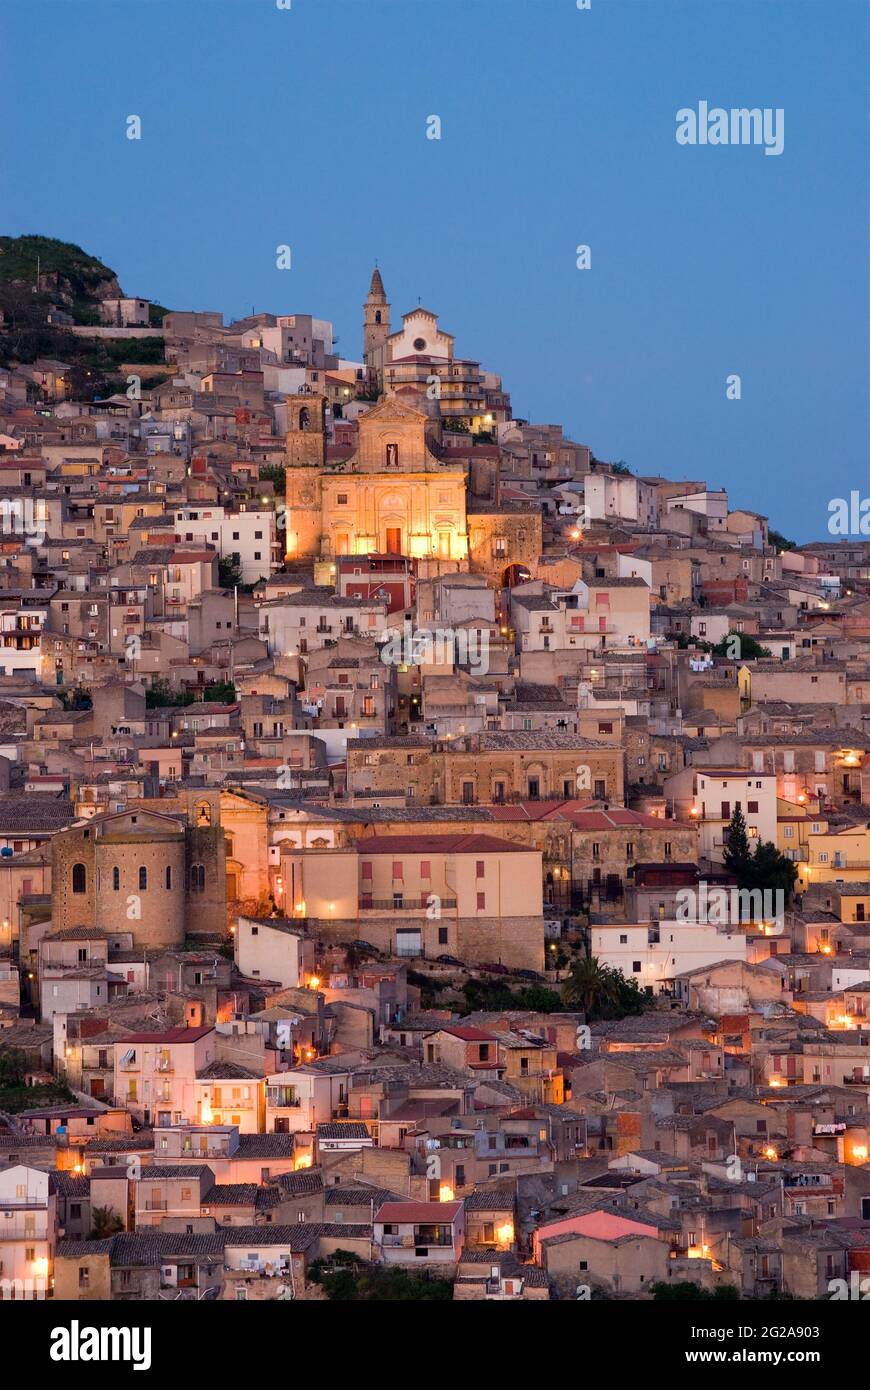 scenic view hillside town of Agira at dusk in Sicily, South Italy Stock Photo